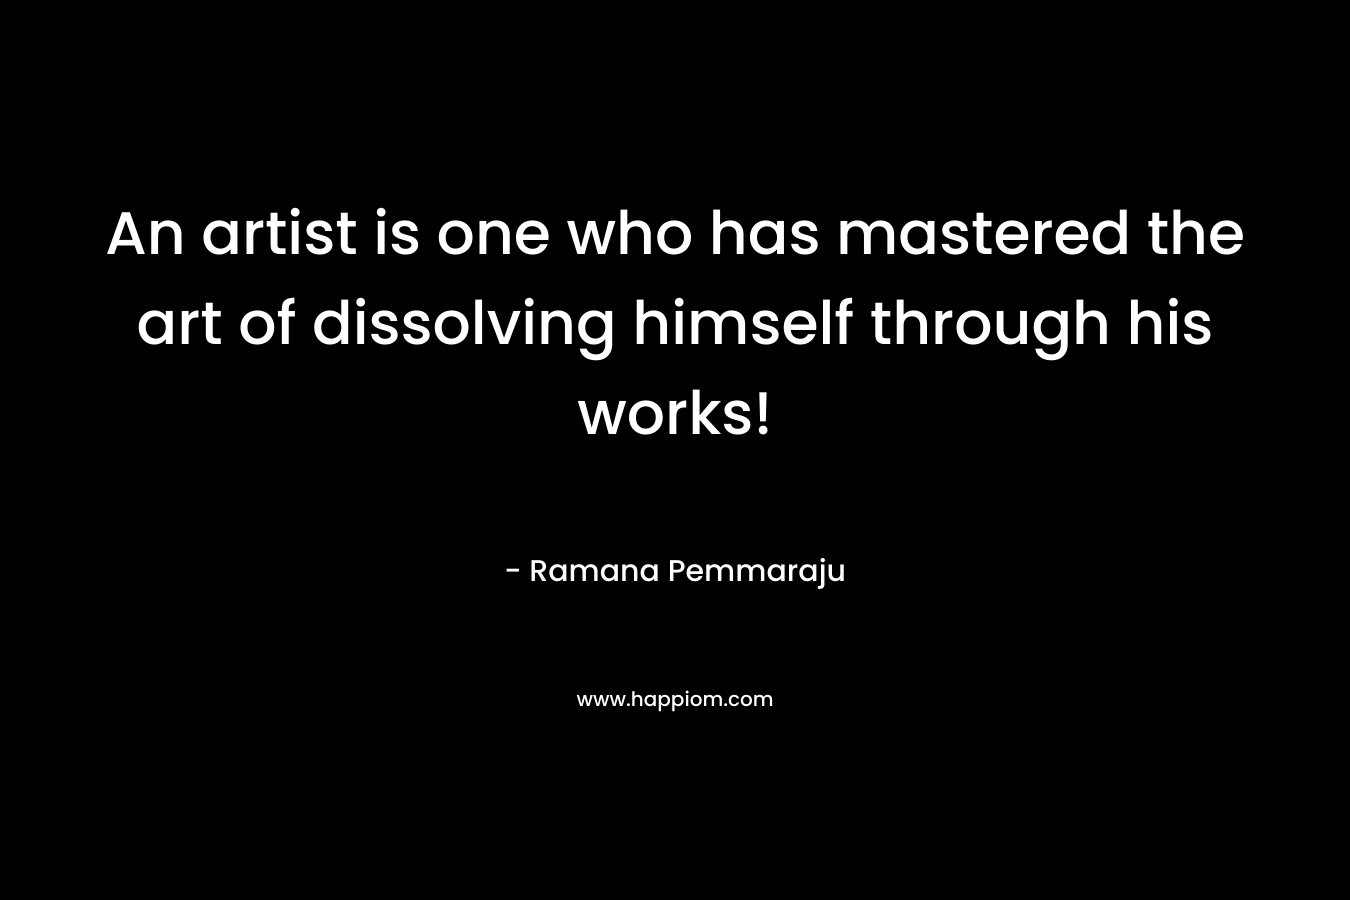 An artist is one who has mastered the art of dissolving himself through his works!